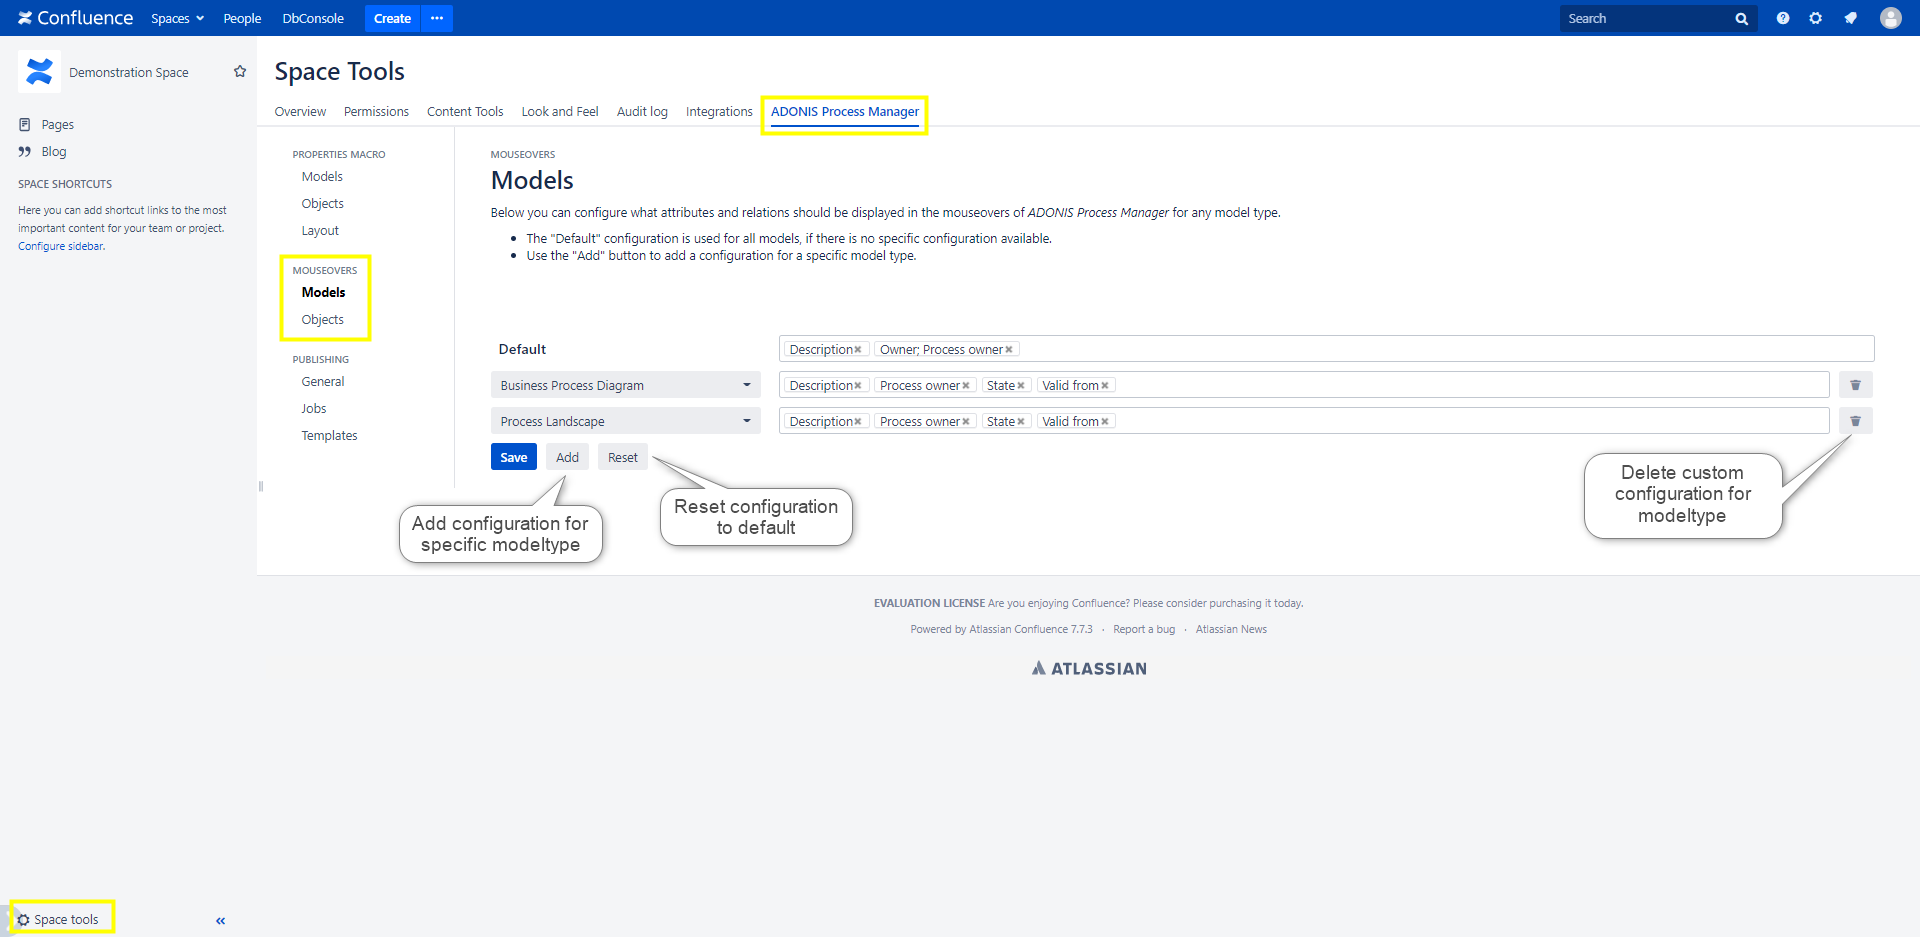 Tooltips and Mouseover configuration for Models in the Confluence Space Tools